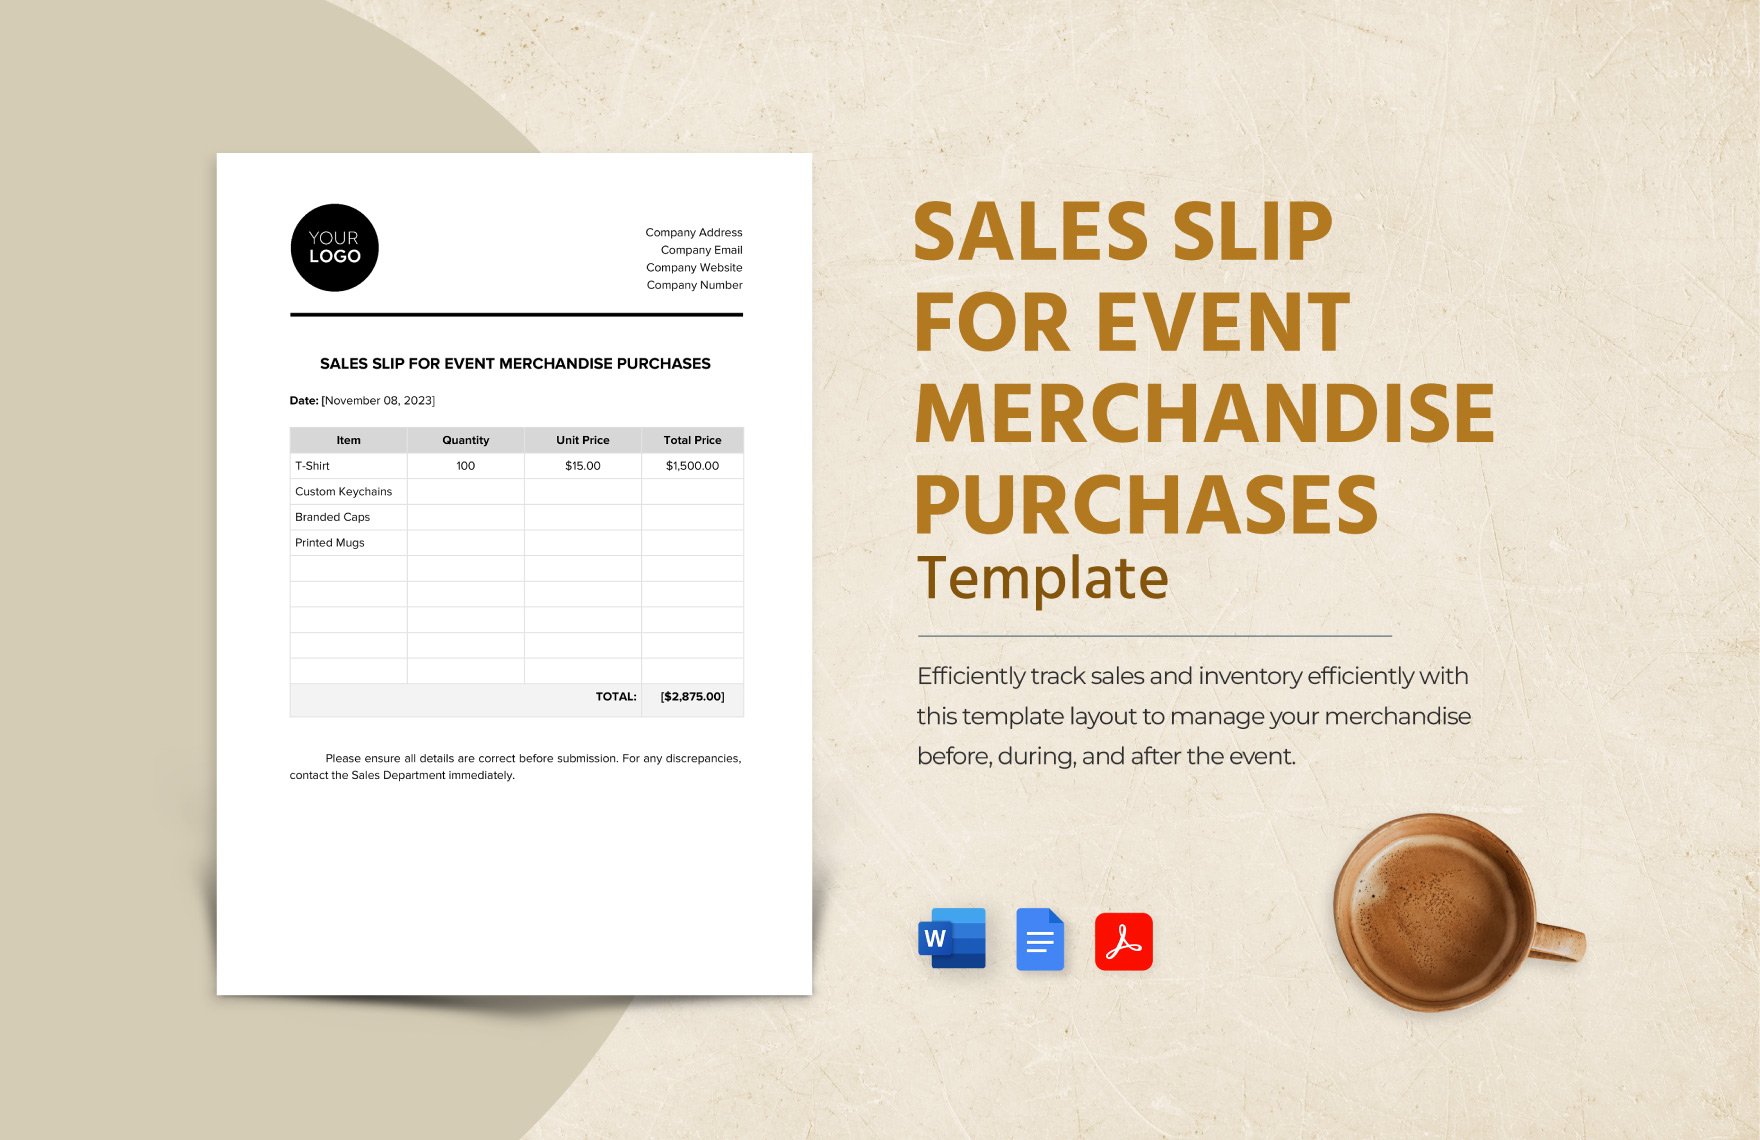 Sales Slip for Event Merchandise Purchases Template